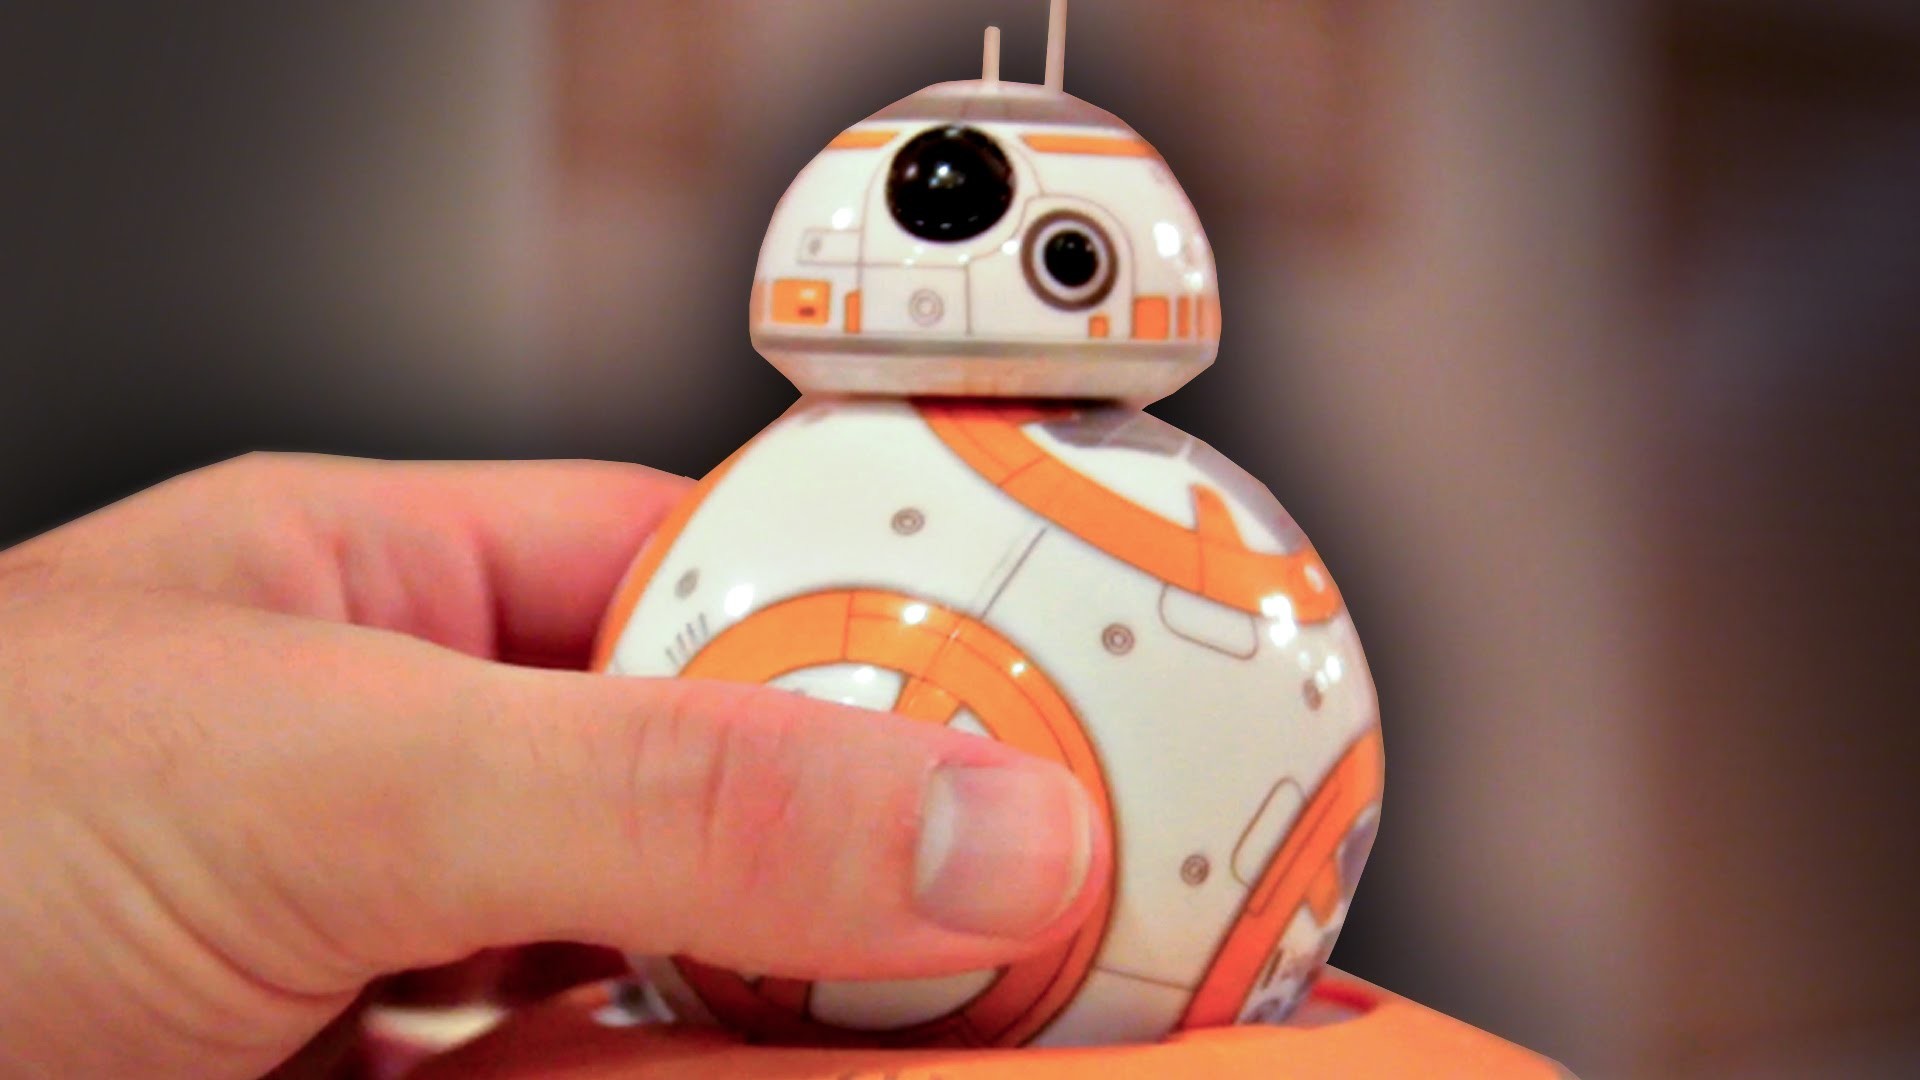 Hands on with BB 8 Ball Droid Toy by Sphero Star Wars Episode 7 The Force Awakens Toy Collection – YouTube